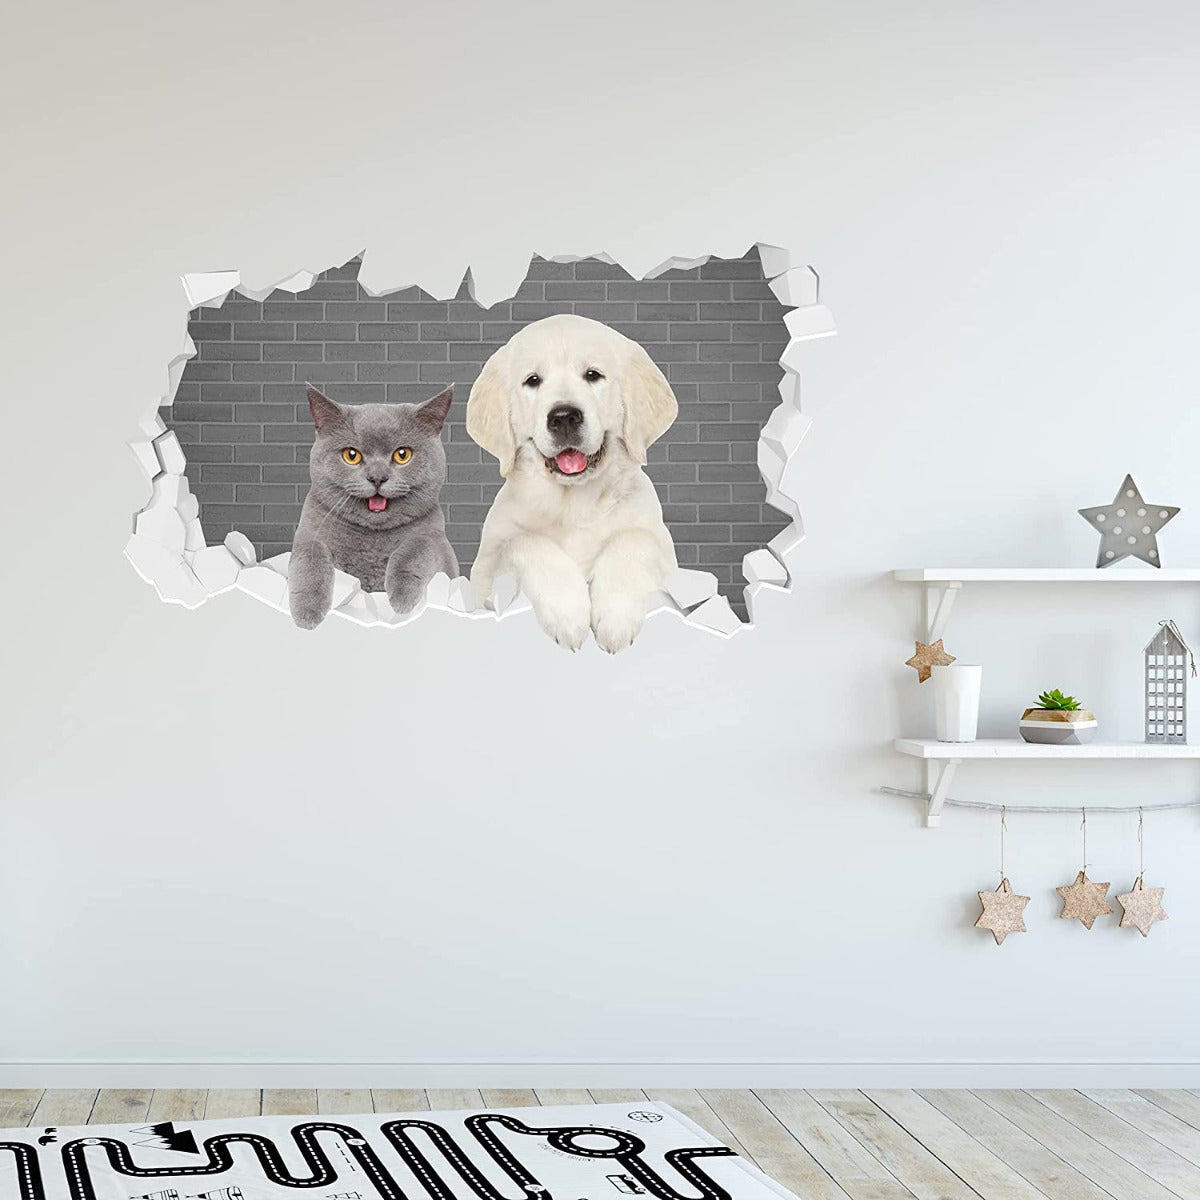 Cat and Dog Leaning Over Broken Wall Sticker